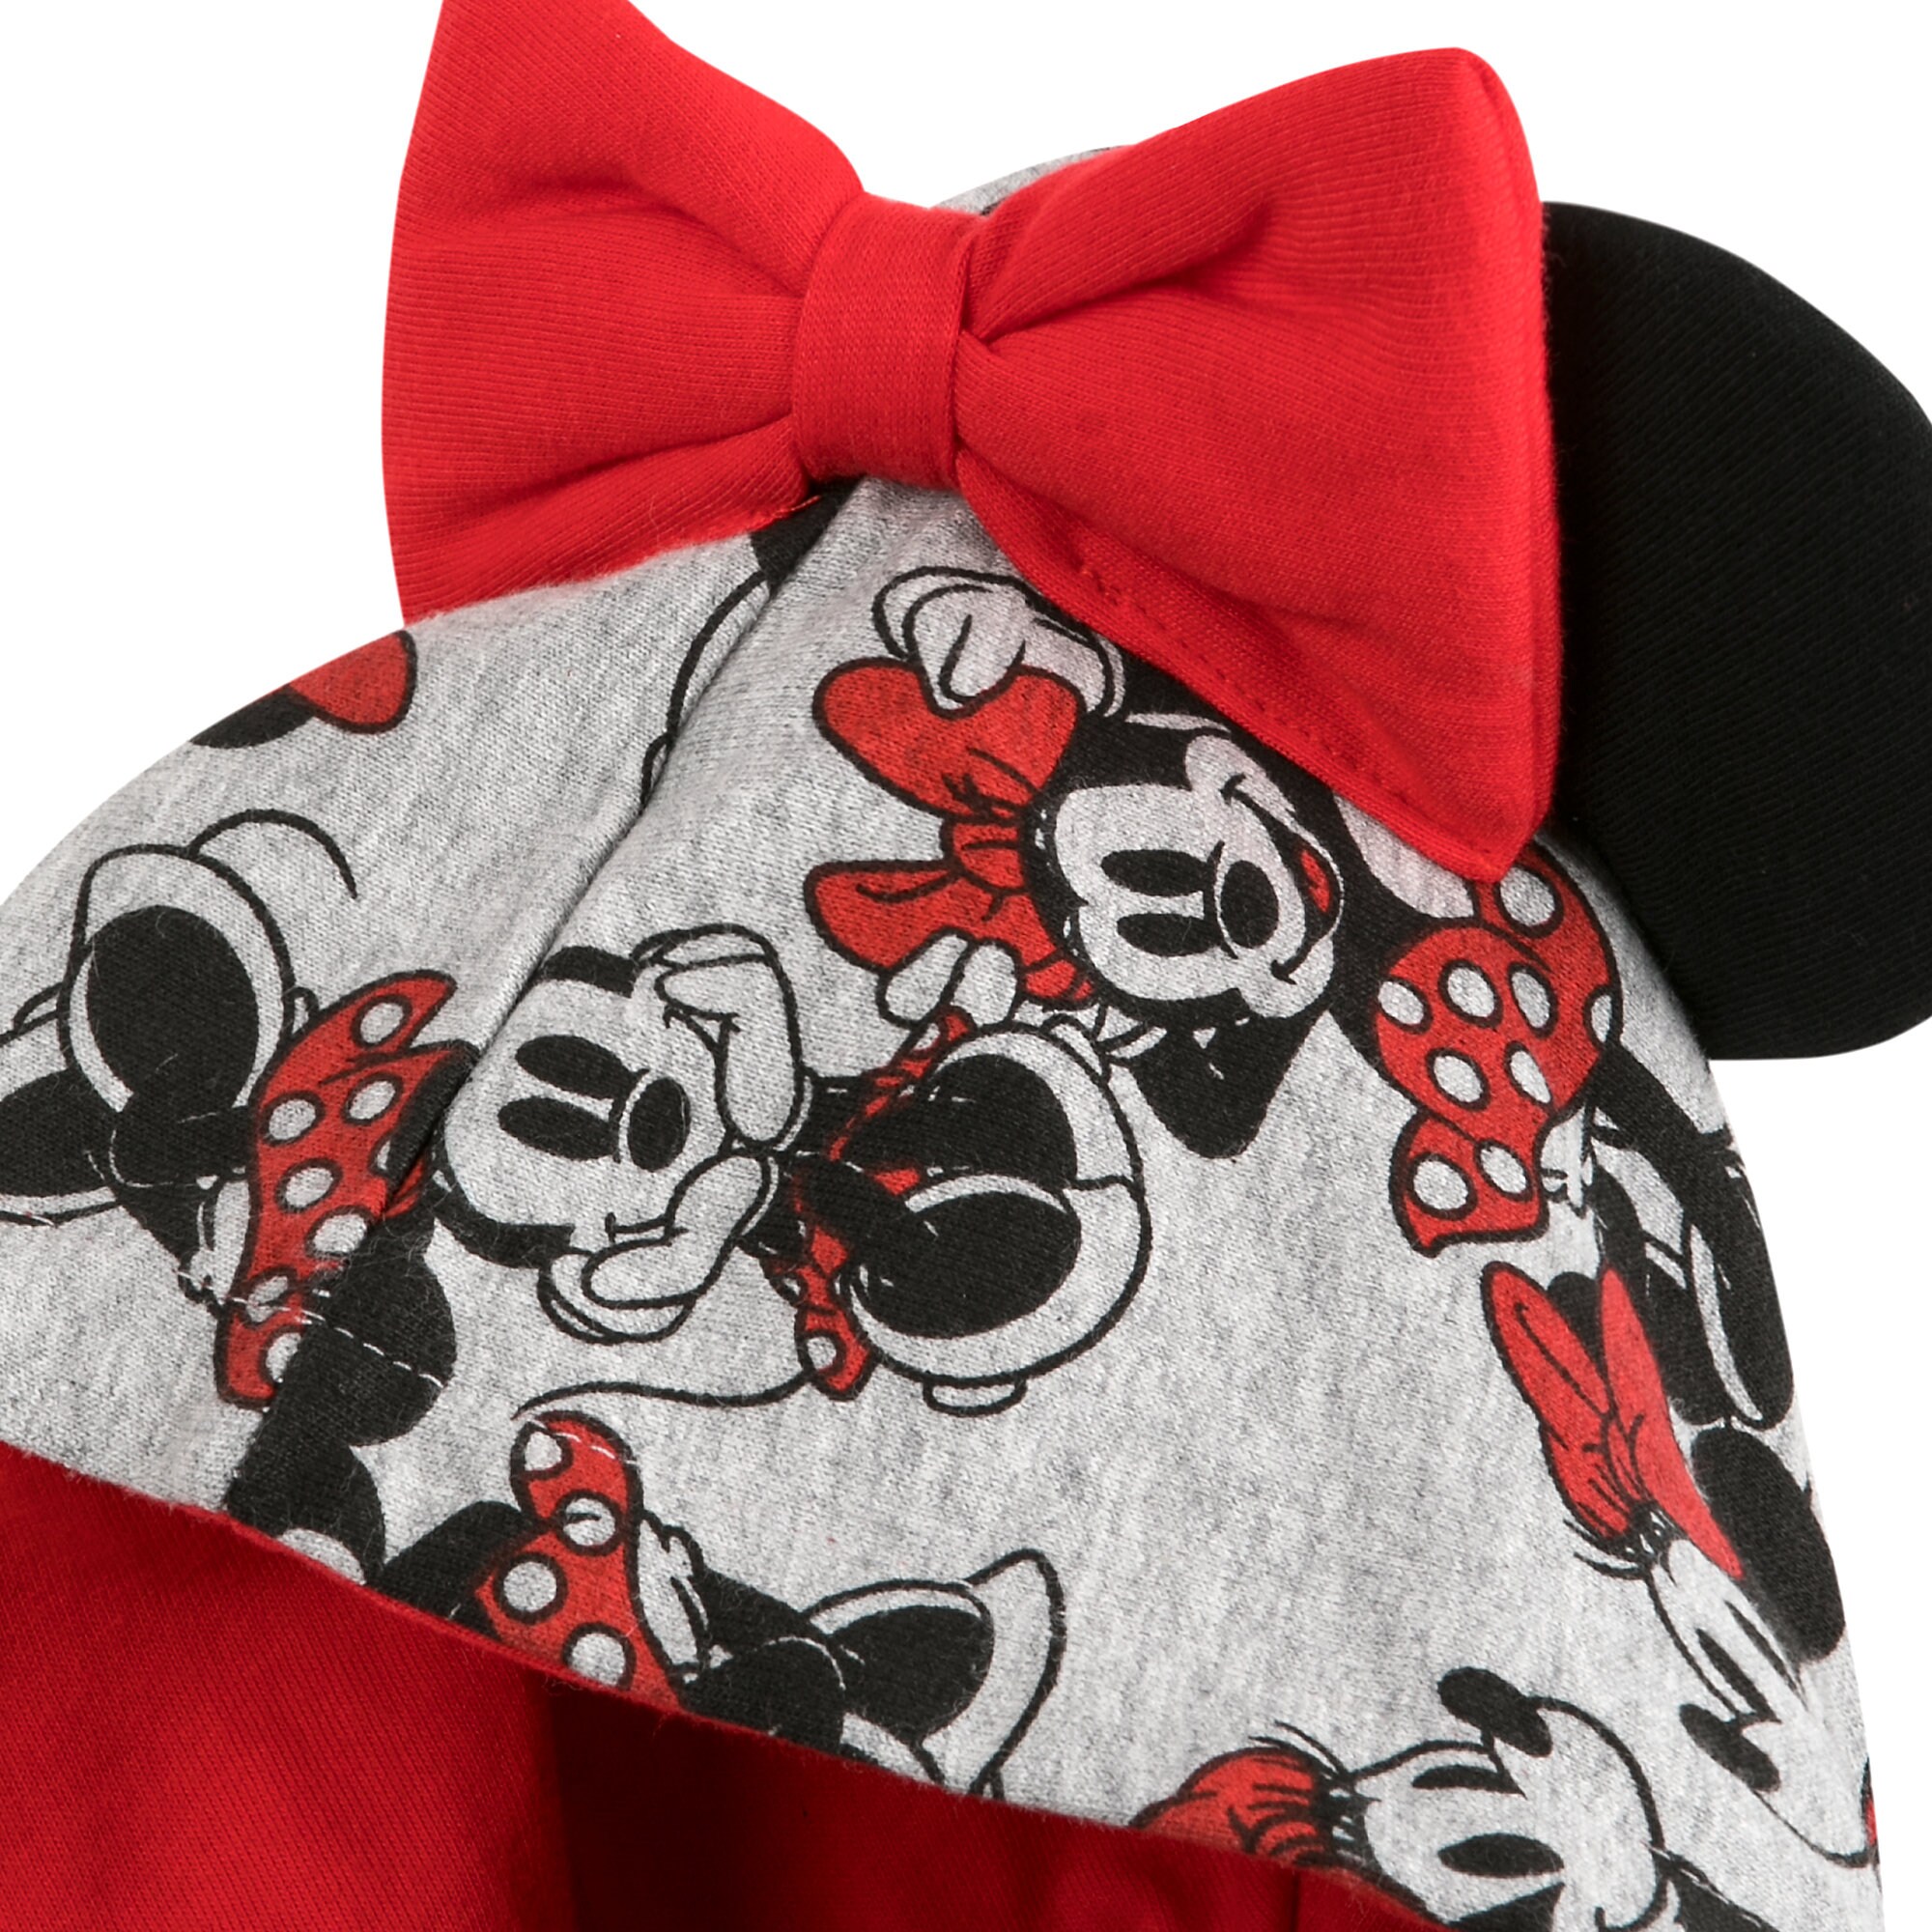 Minnie Mouse Hoodie for Baby